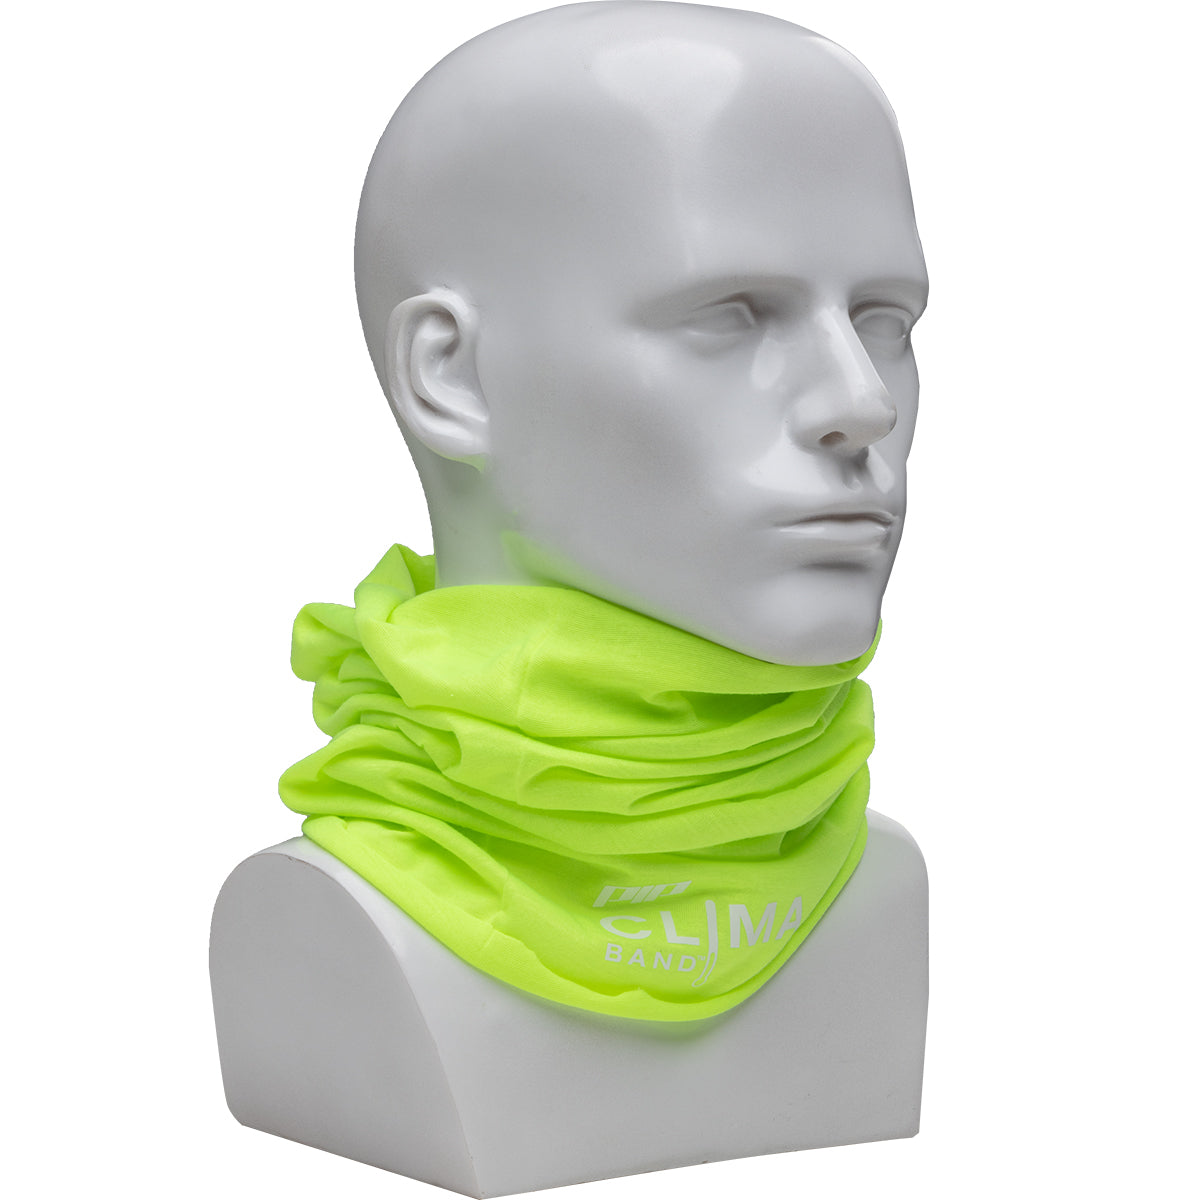 PIP 393-200-YEL Absorptive Head & Neck Cover